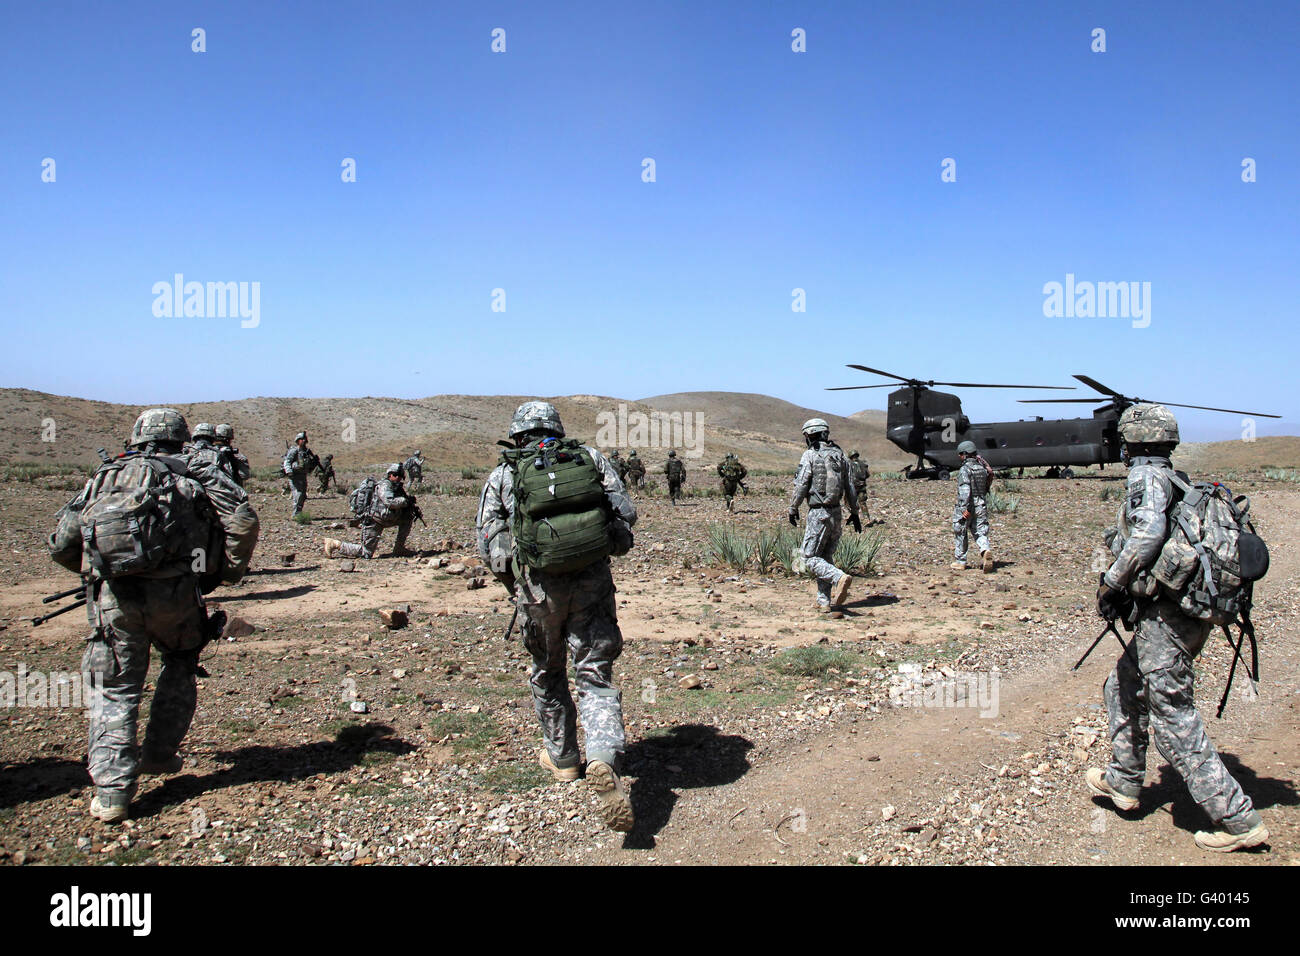 U.S. Army Soldiers run back to their Ch-47 Chinook helicopters in Bak, Khowst province, Afghanistan. Stock Photo